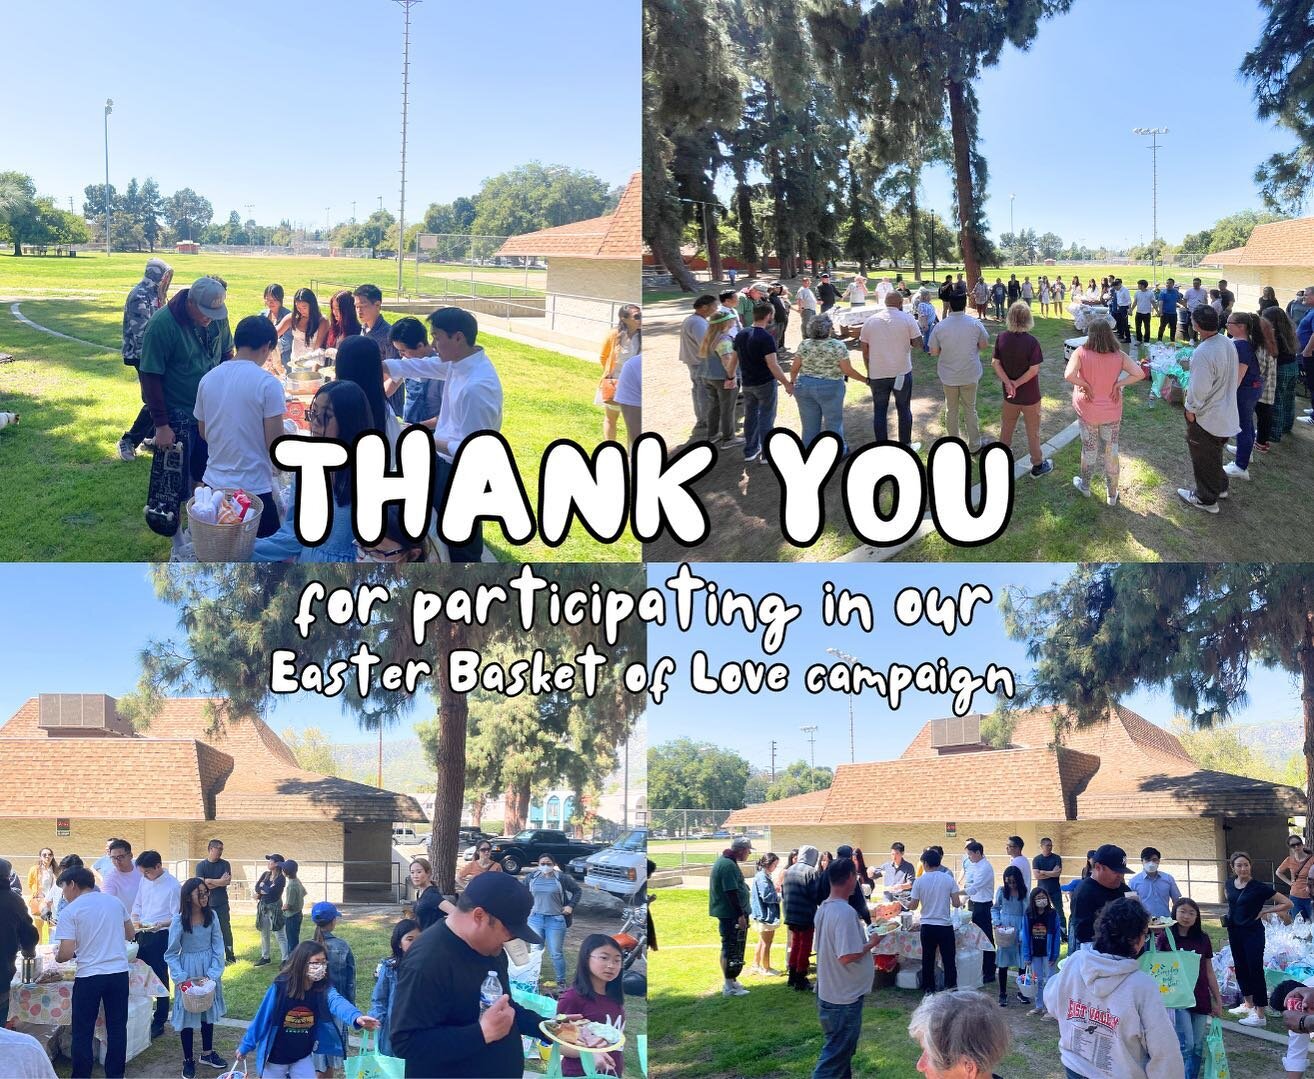 Our church collectively prepared over 50 baskets!

From children passing out the baskets to the community, high schoolers helping serve food, and one of our community groups preparing food - it was a blessing to see our ancc family come together to s